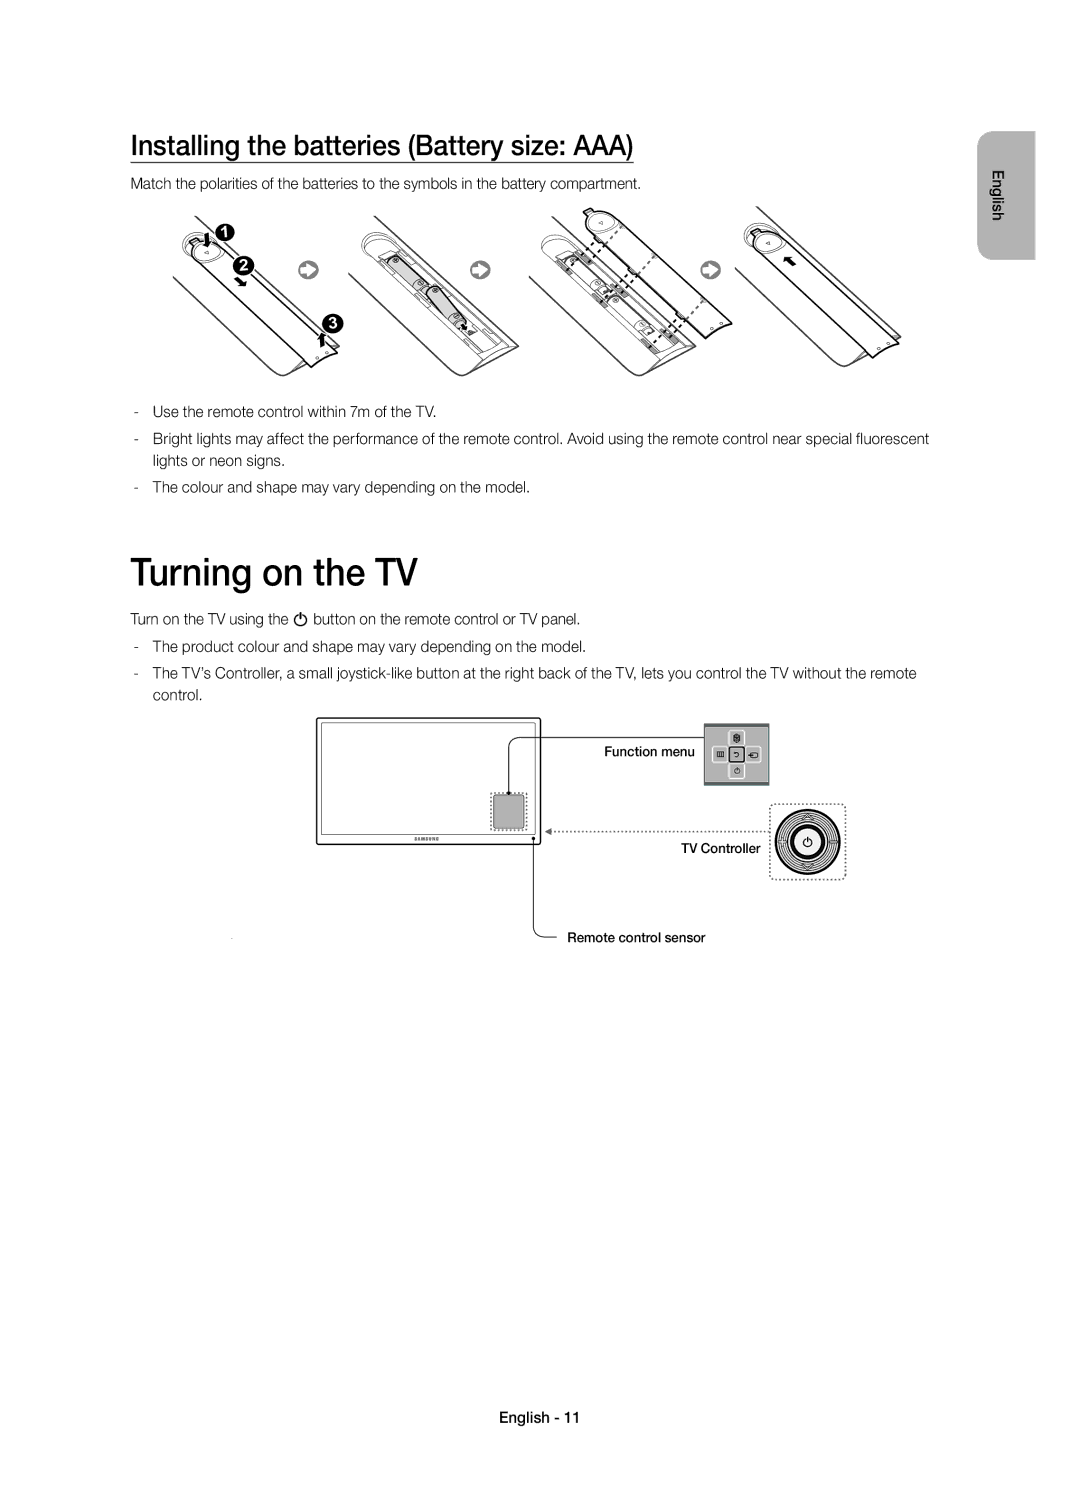 Samsung UE48H5570SSXZG, UE32H5570SSXZG, UE48H5510SSXZG manual Turning on the TV, Installing the batteries Battery size AAA 